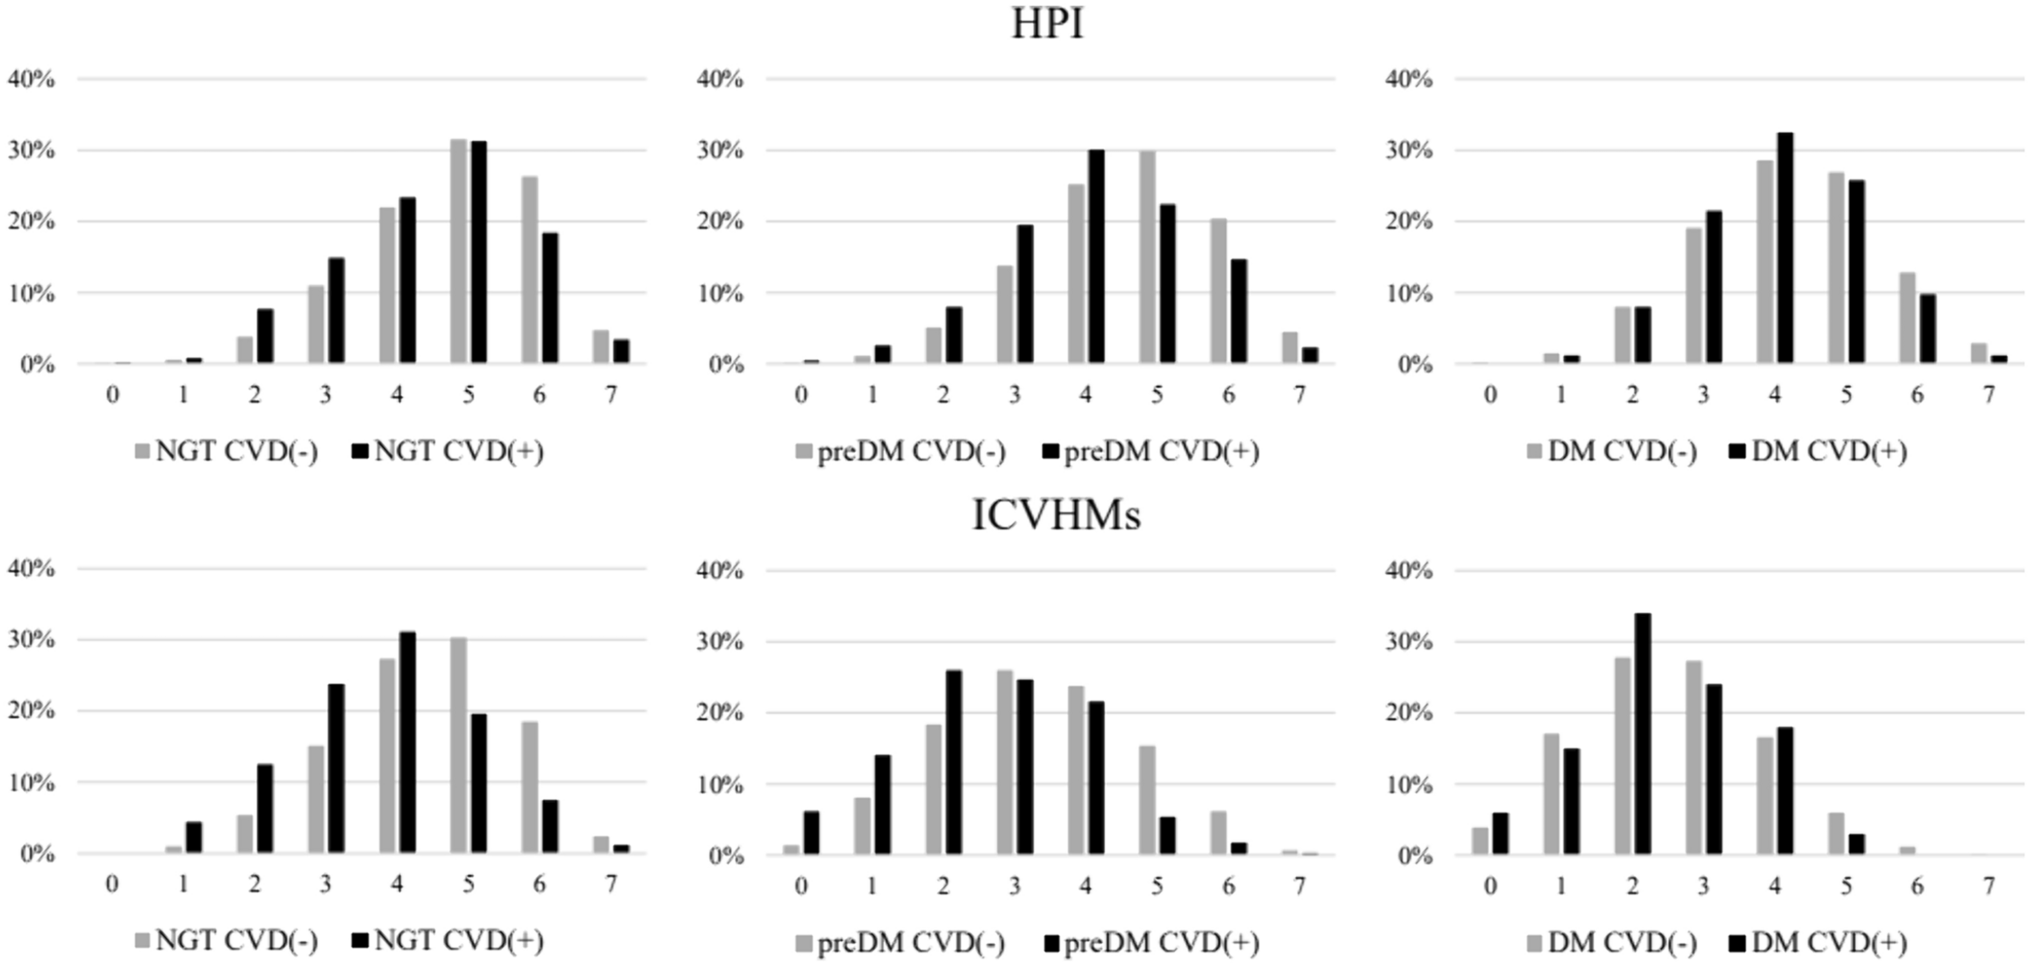 Impact of health practice index and cardiovascular health metrics on incident cardiovascular disease according to glucose tolerance status